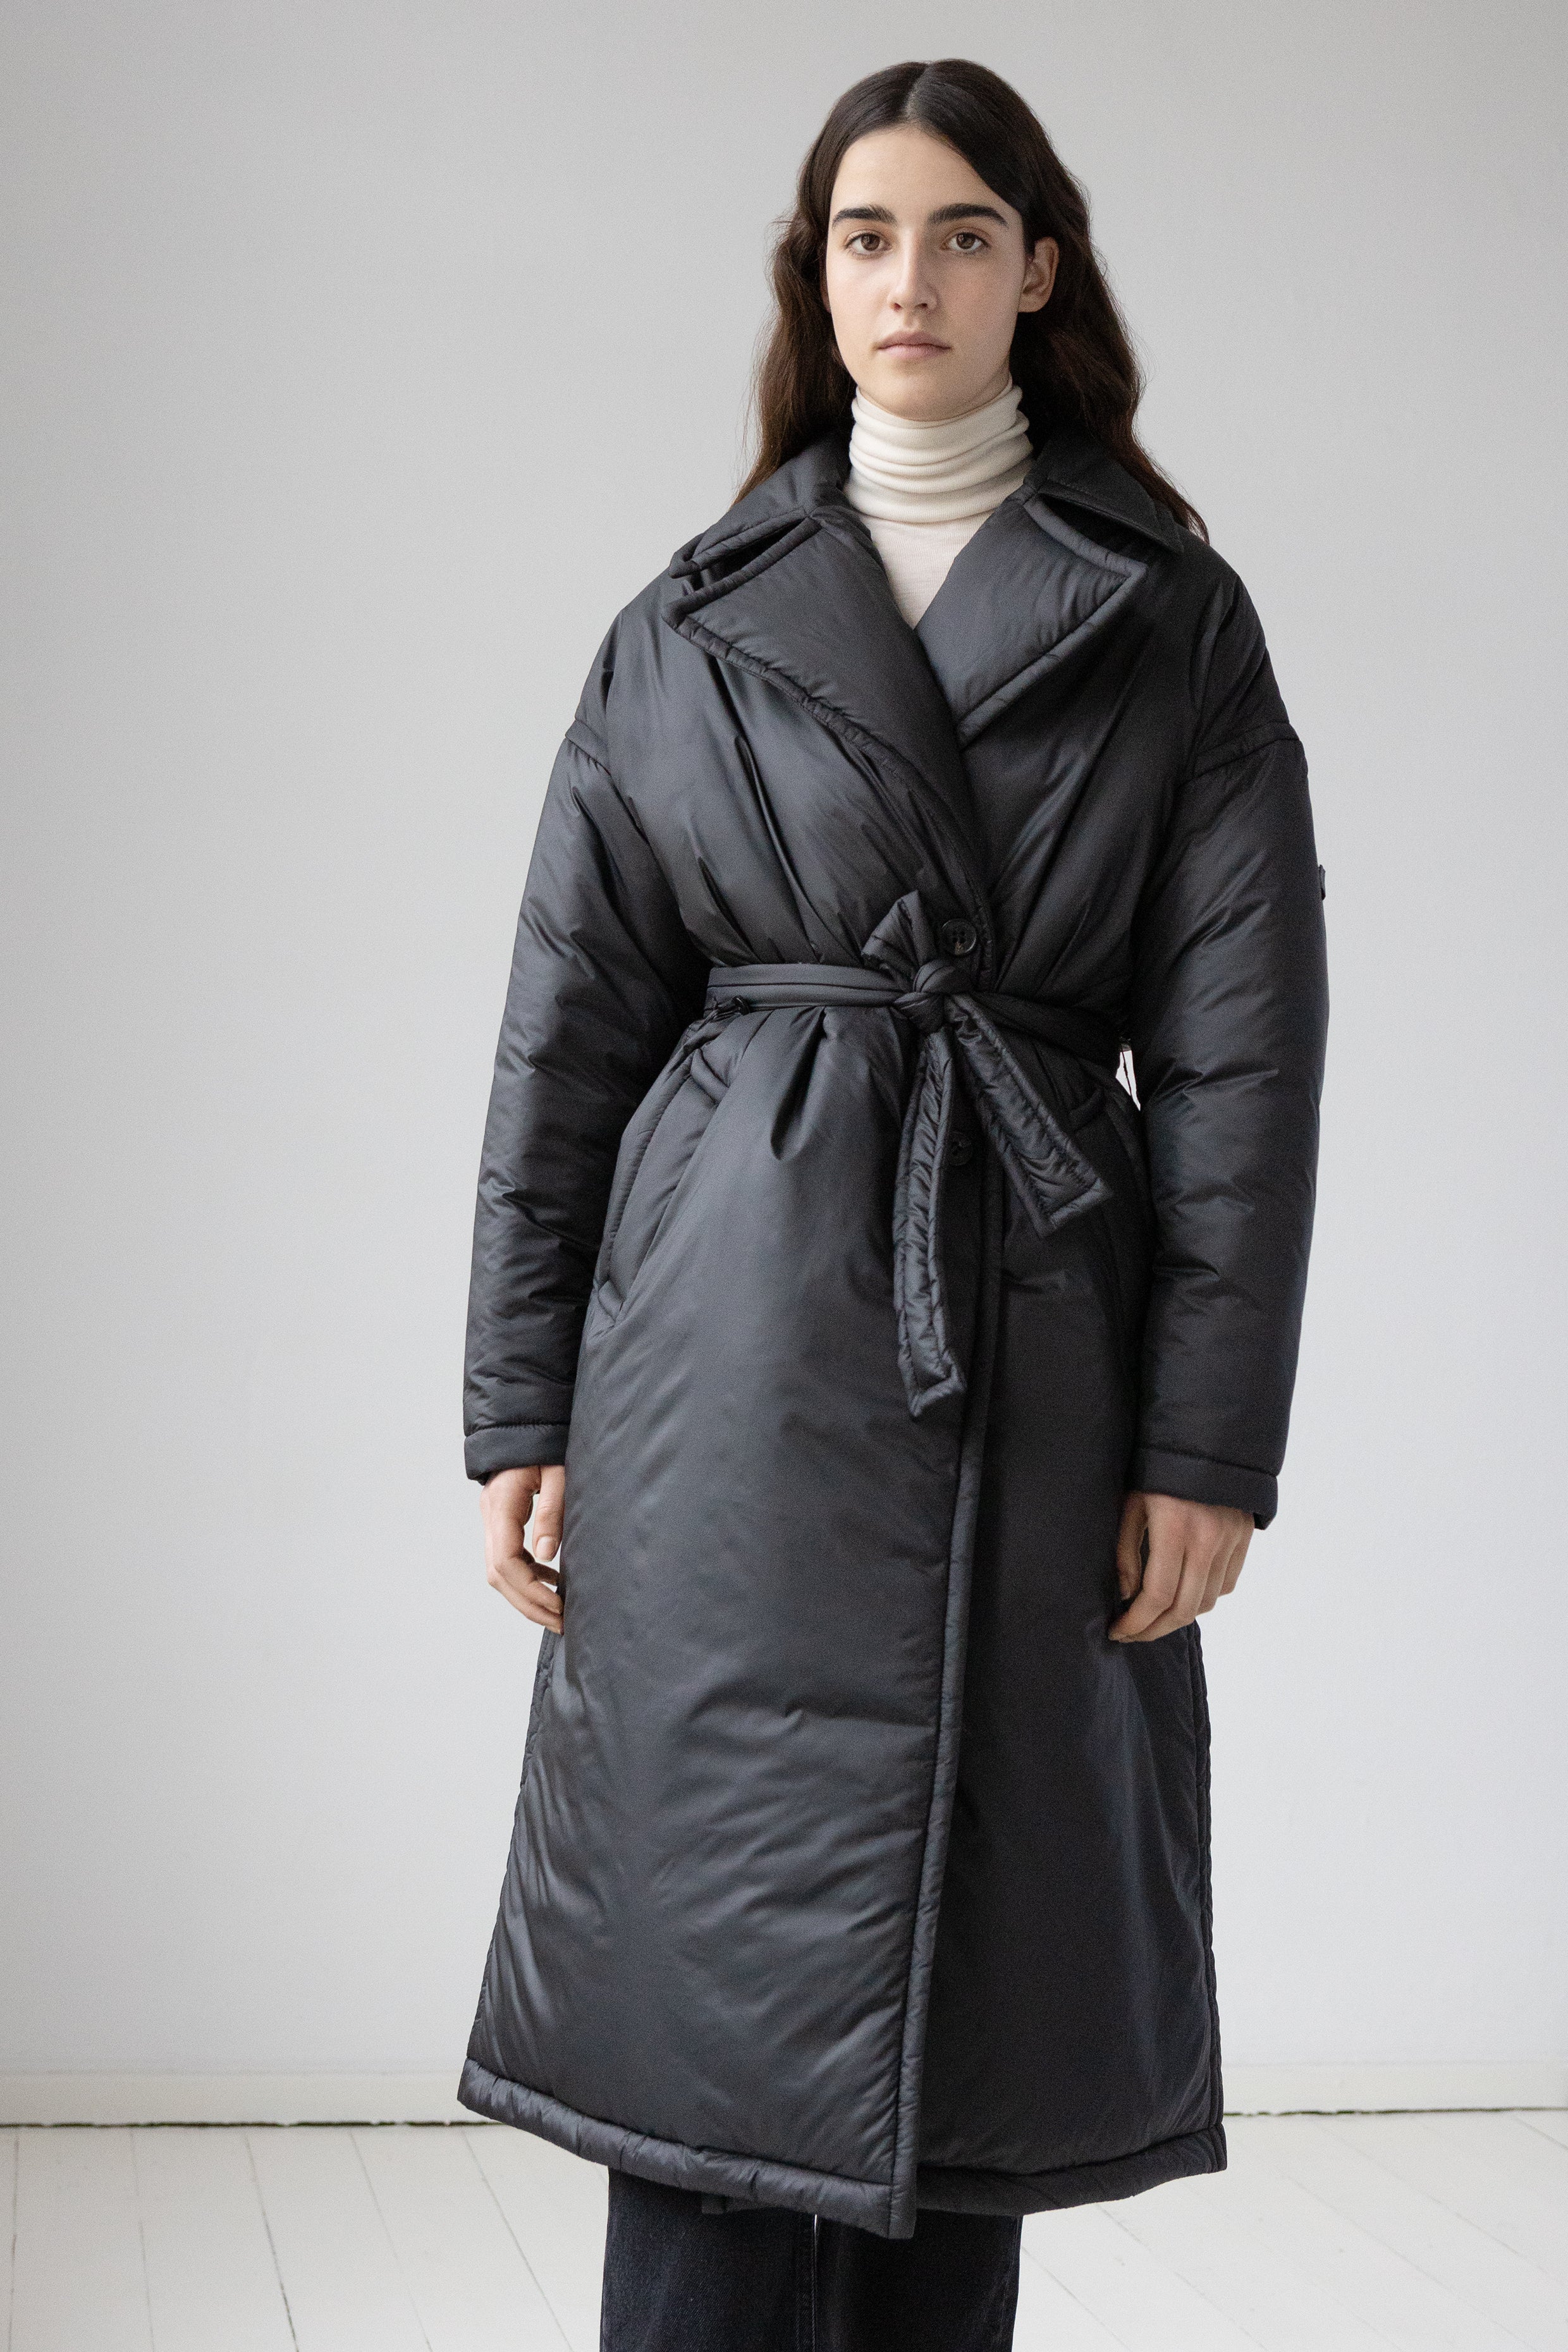 lightweight Lempelius trenchcoat with a relaxed fit